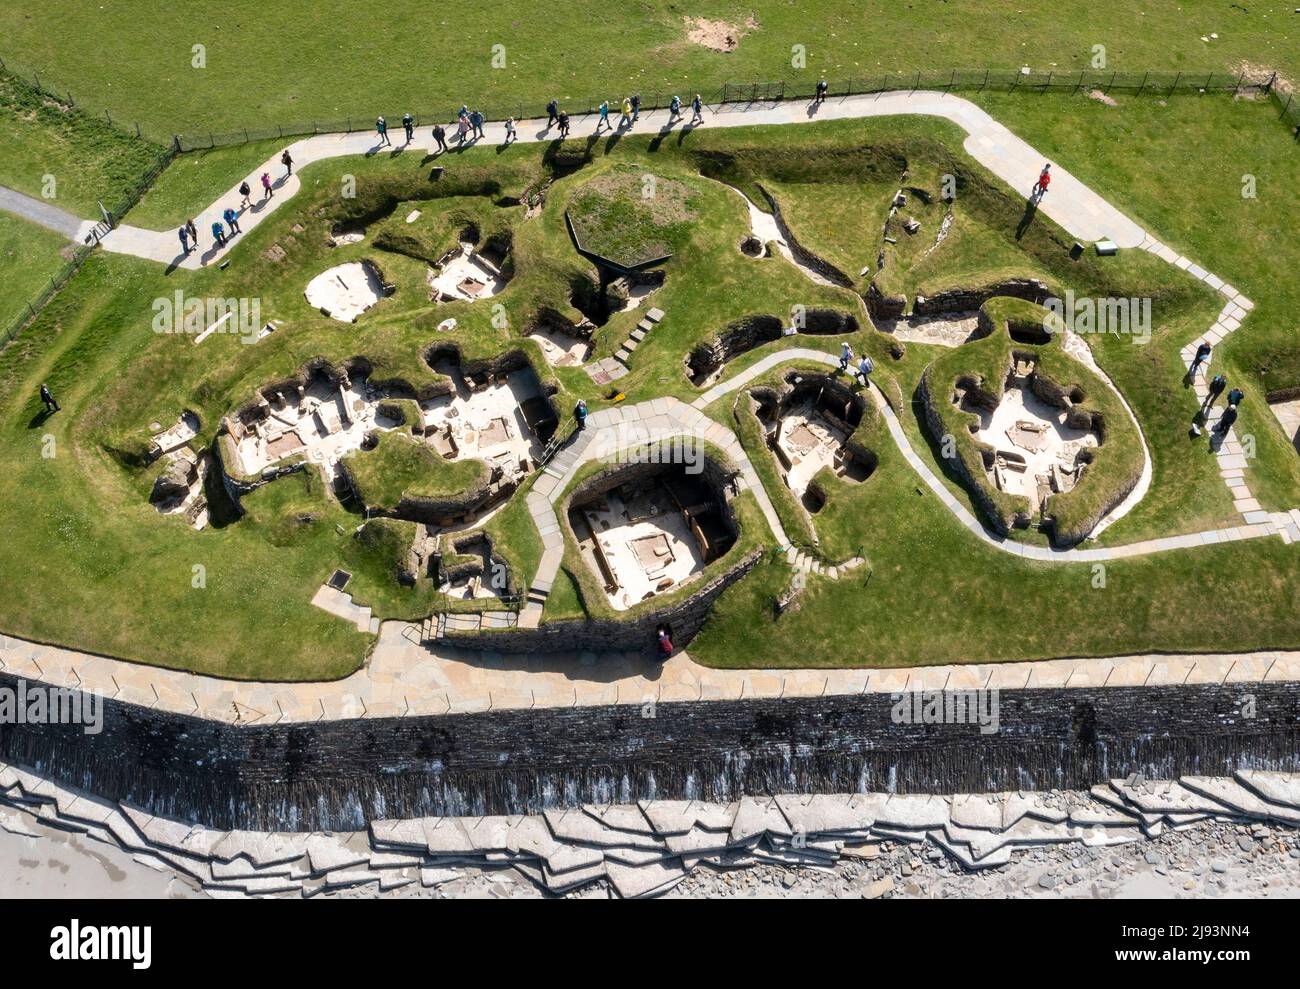 Aerial view of Skara Brae Neolithic settlement, Bay of Skaill, Orkney West Mainland, Orkney Islands. Stock Photo